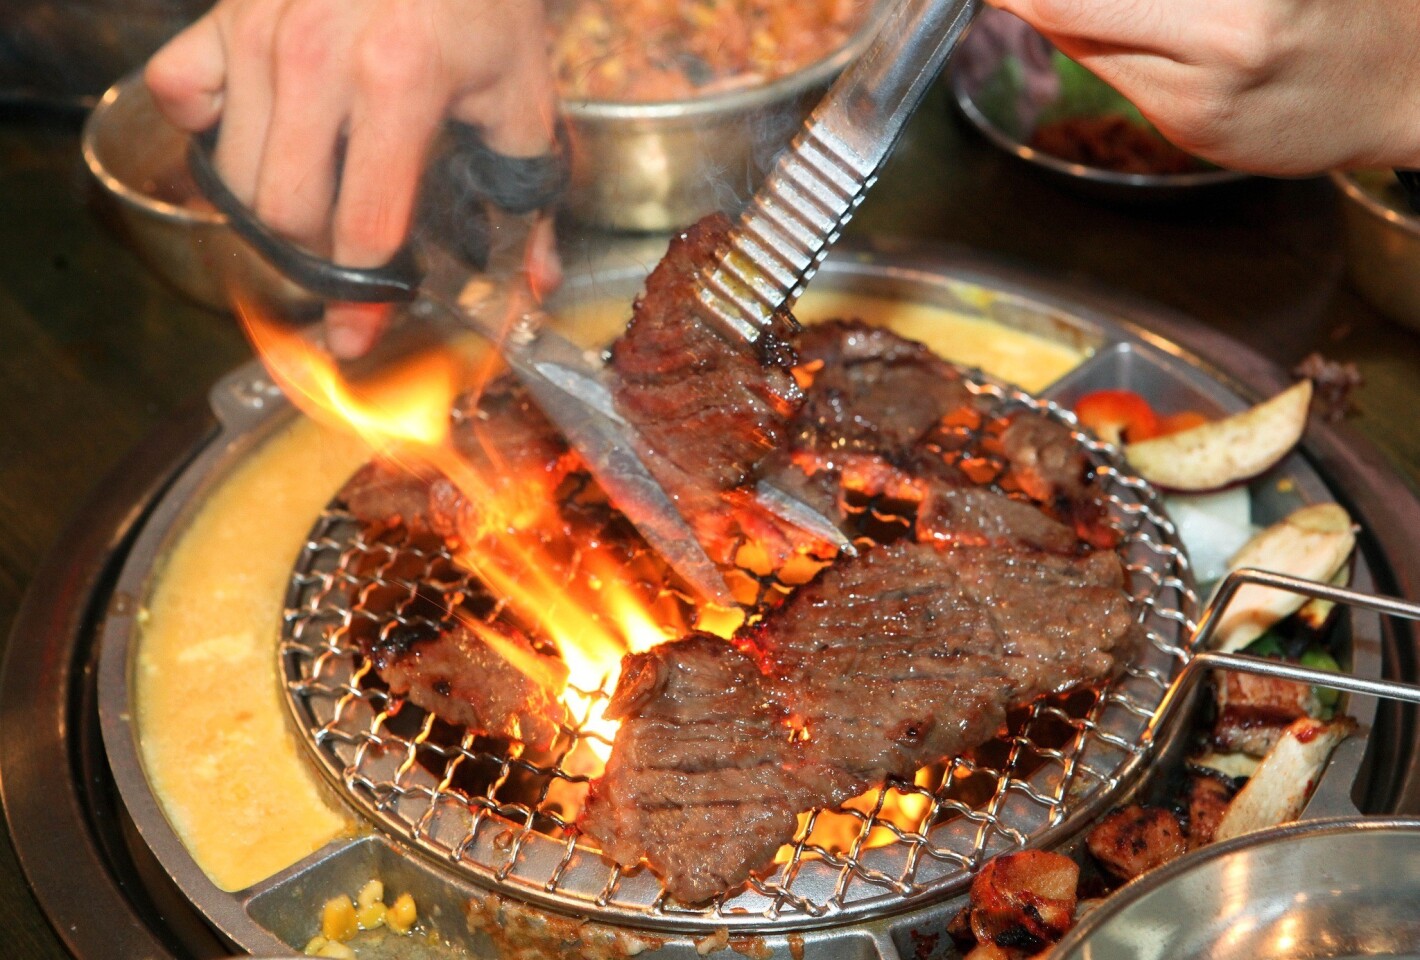 Portions of galbi beef are cut into smaller pieces as it cooks on a tabletop burner. Beaten egg and corn with cheese are also arrayed around the burners.